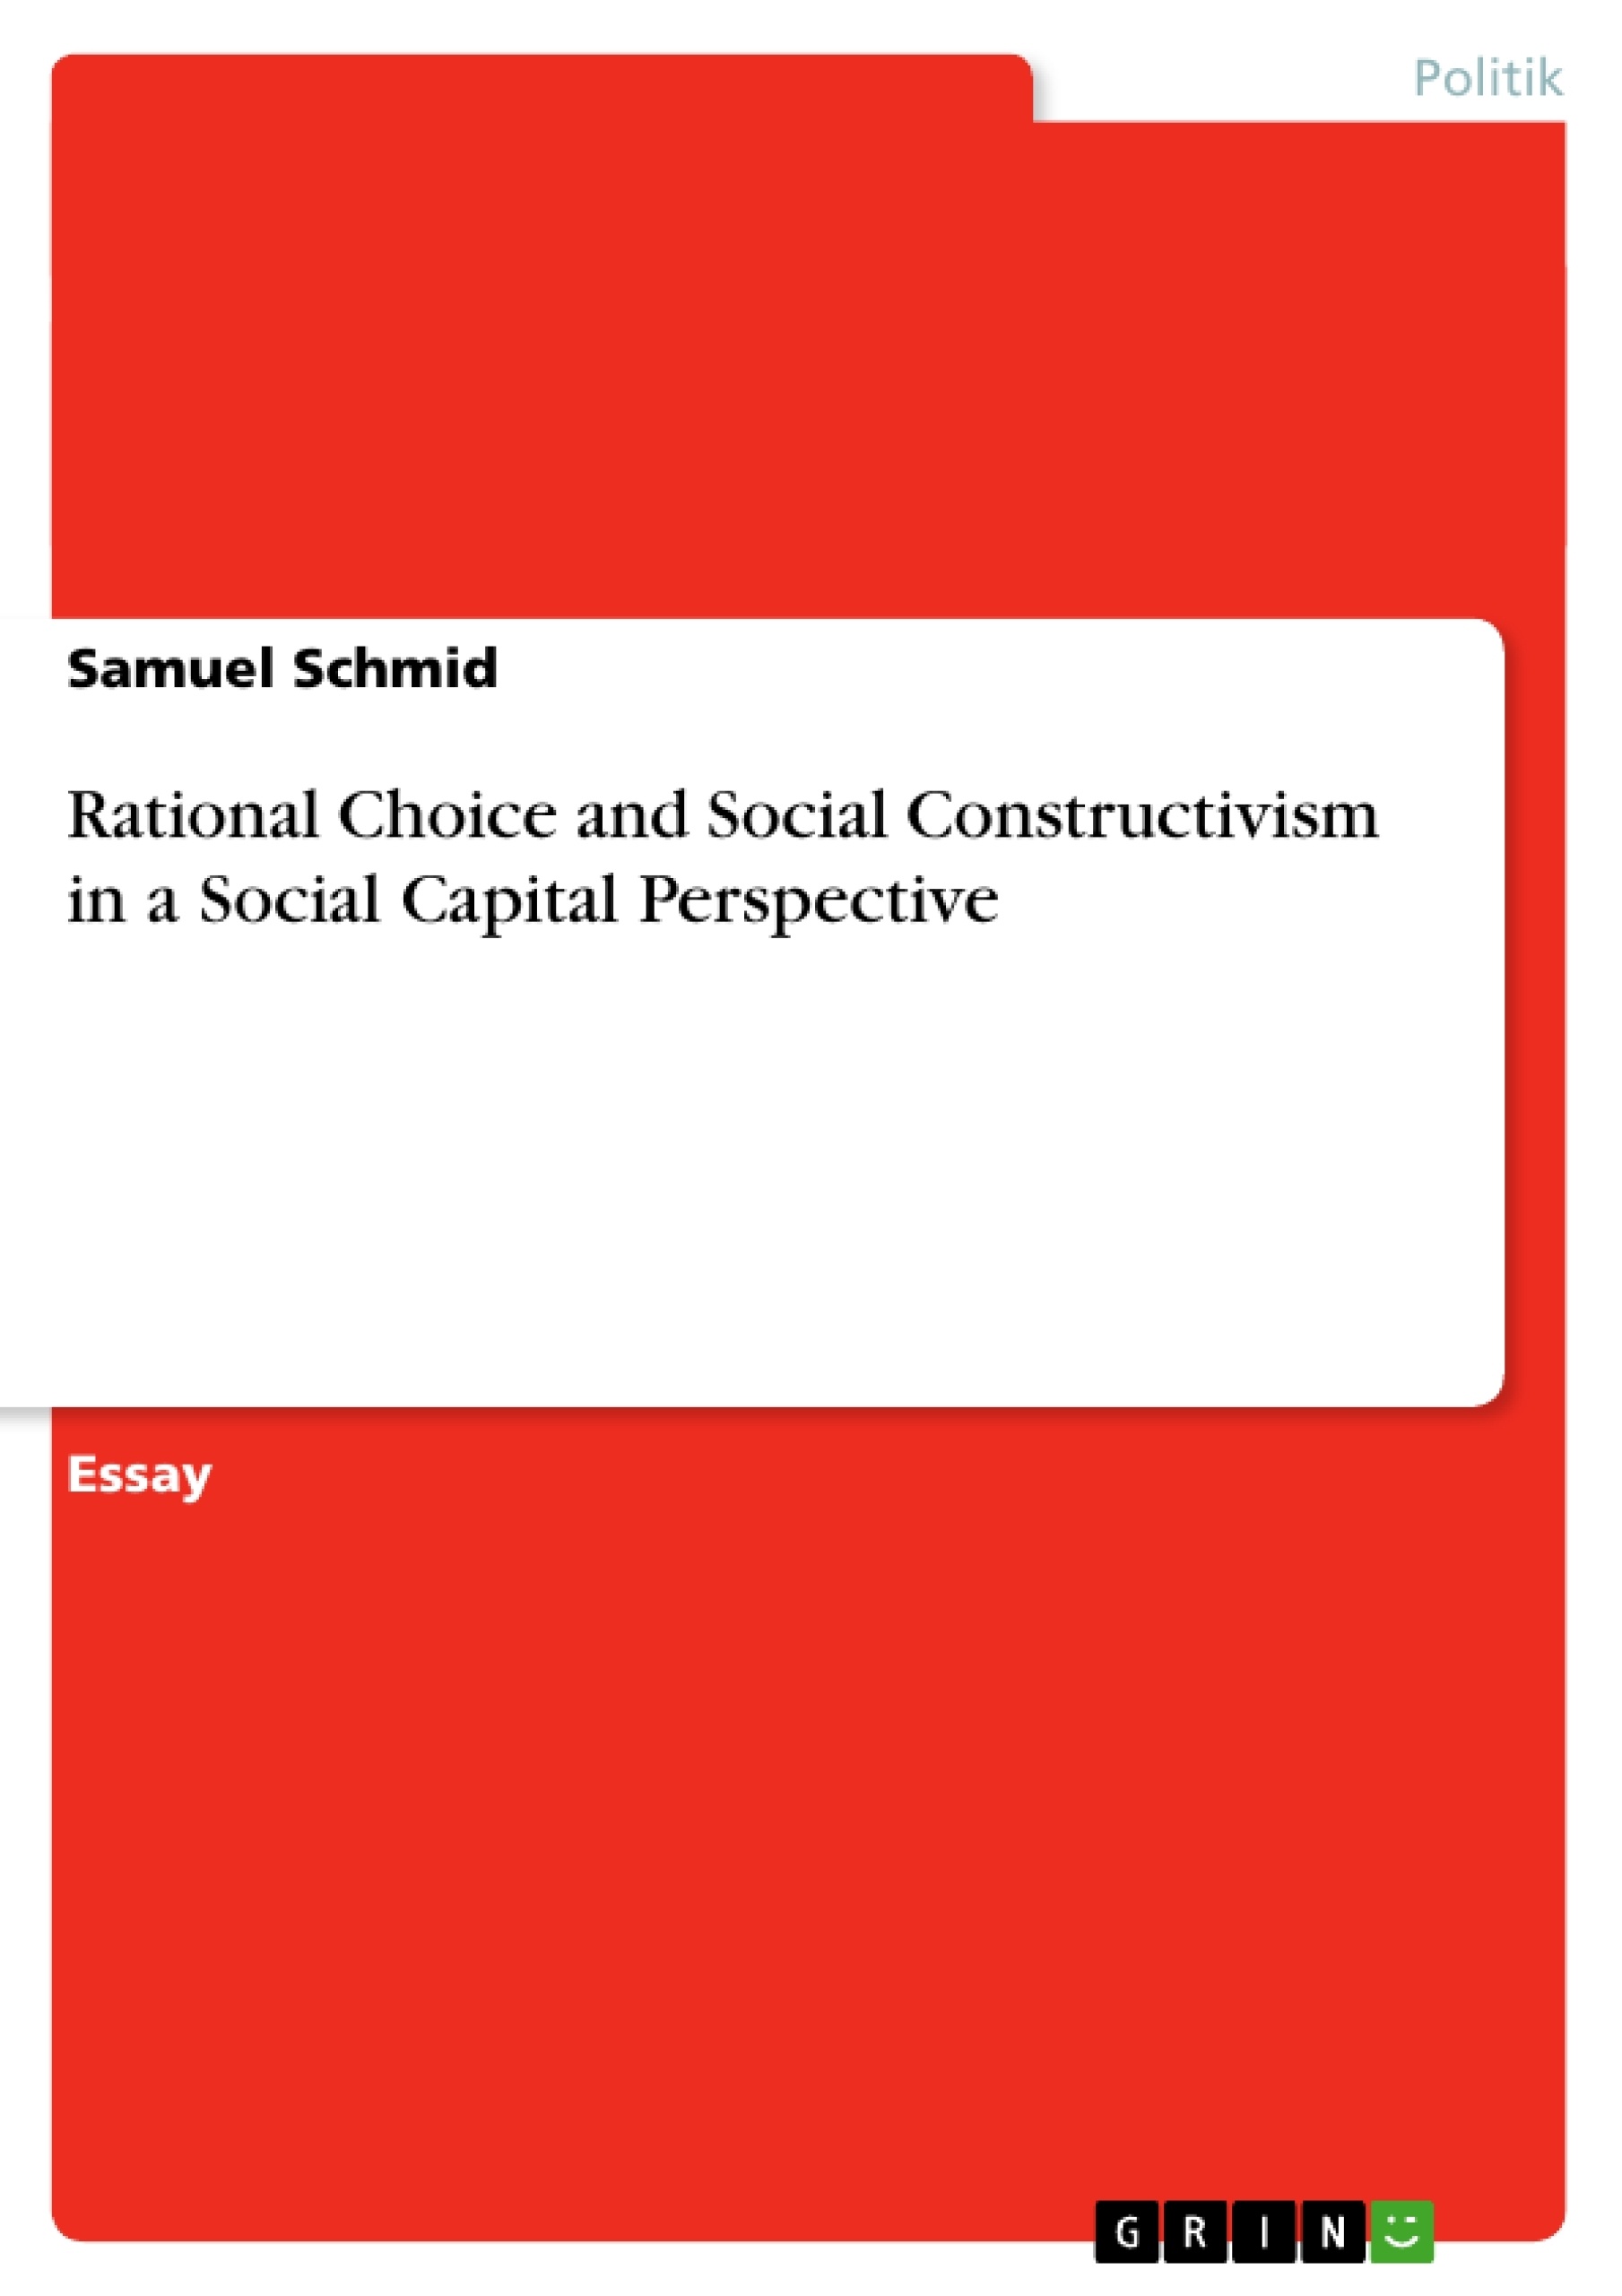 Título: Rational Choice and Social Constructivism in a Social Capital Perspective